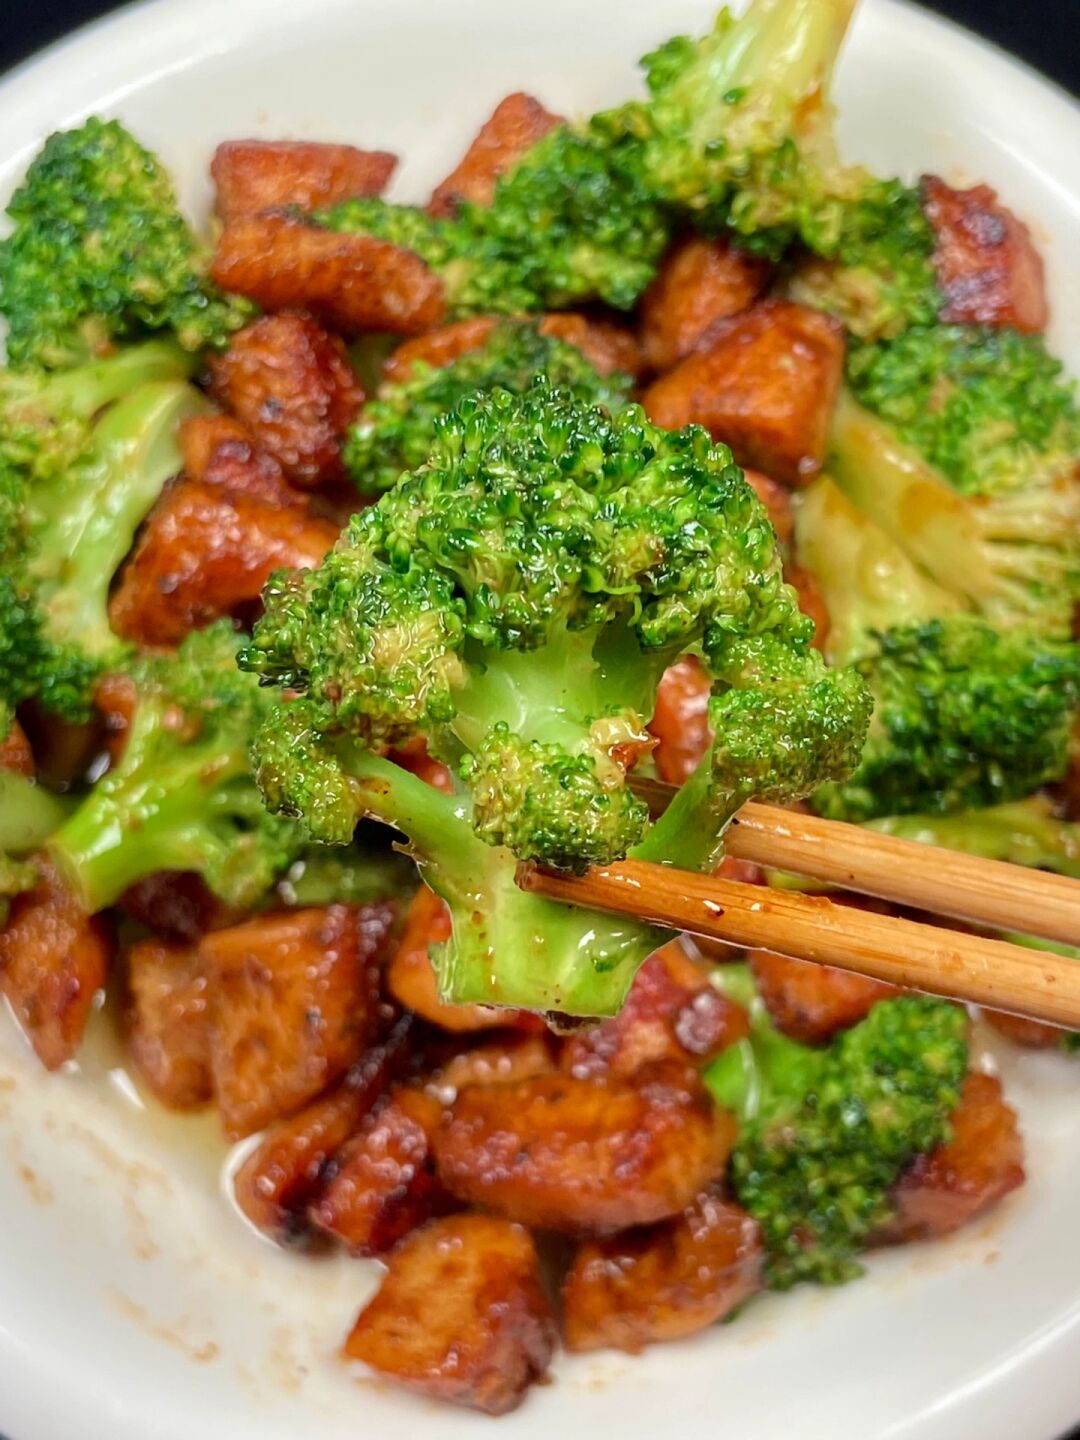 Chicken with Broccoli 西兰花炒鸡 | Xing Yun Asian Restaurant